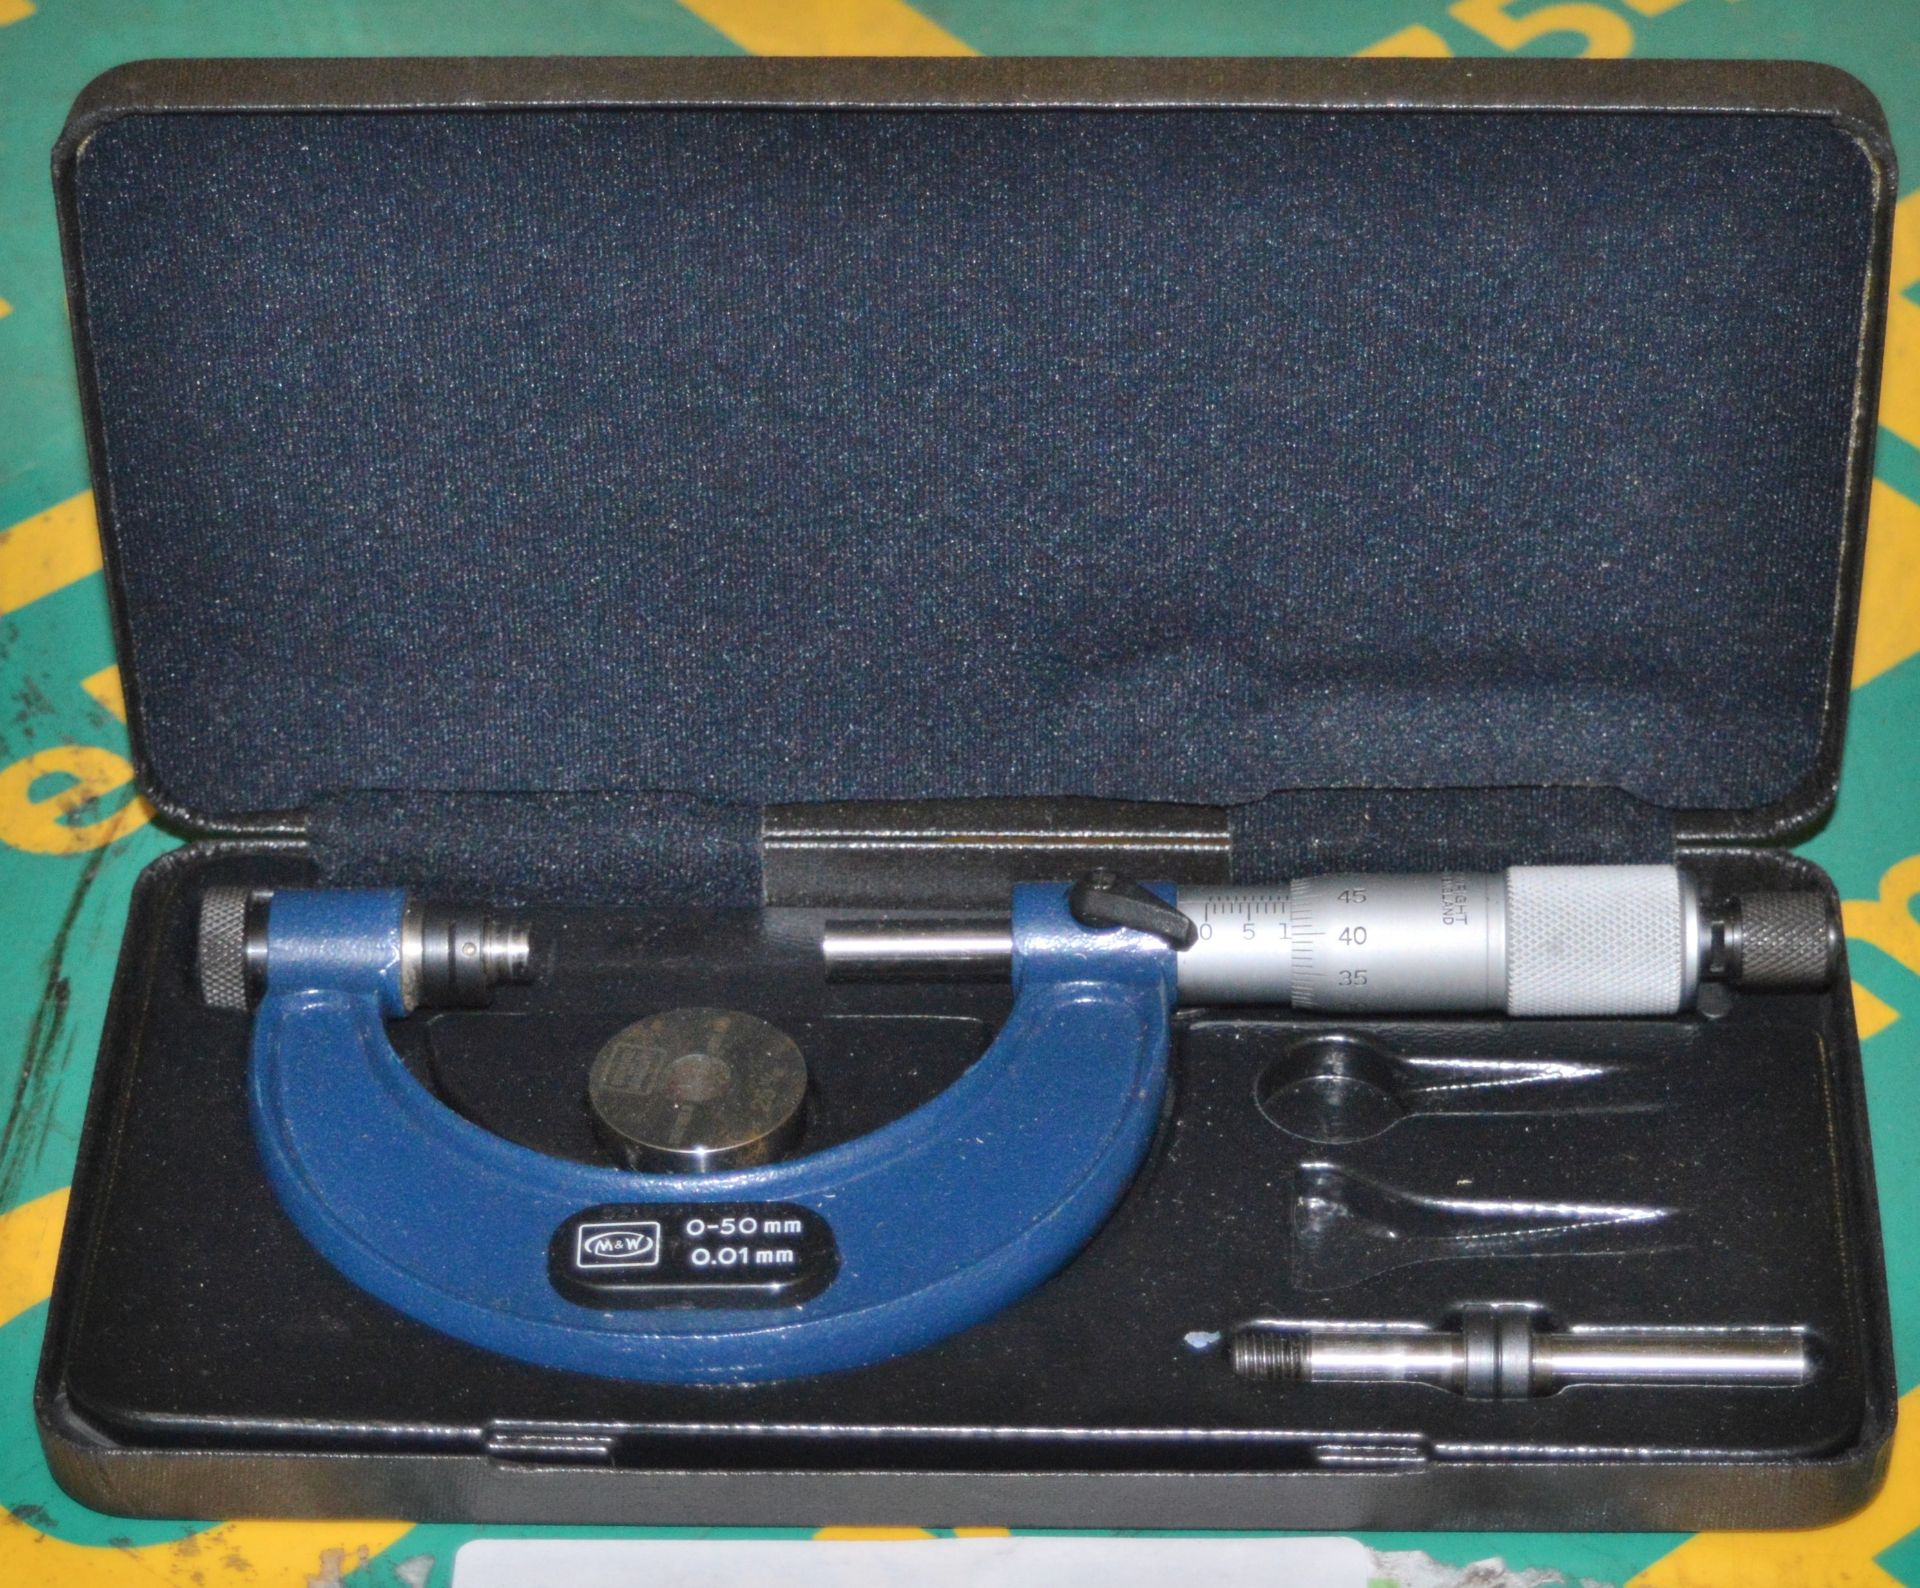 Moore & Wright Micrometer 0-50mm 0.01mm.